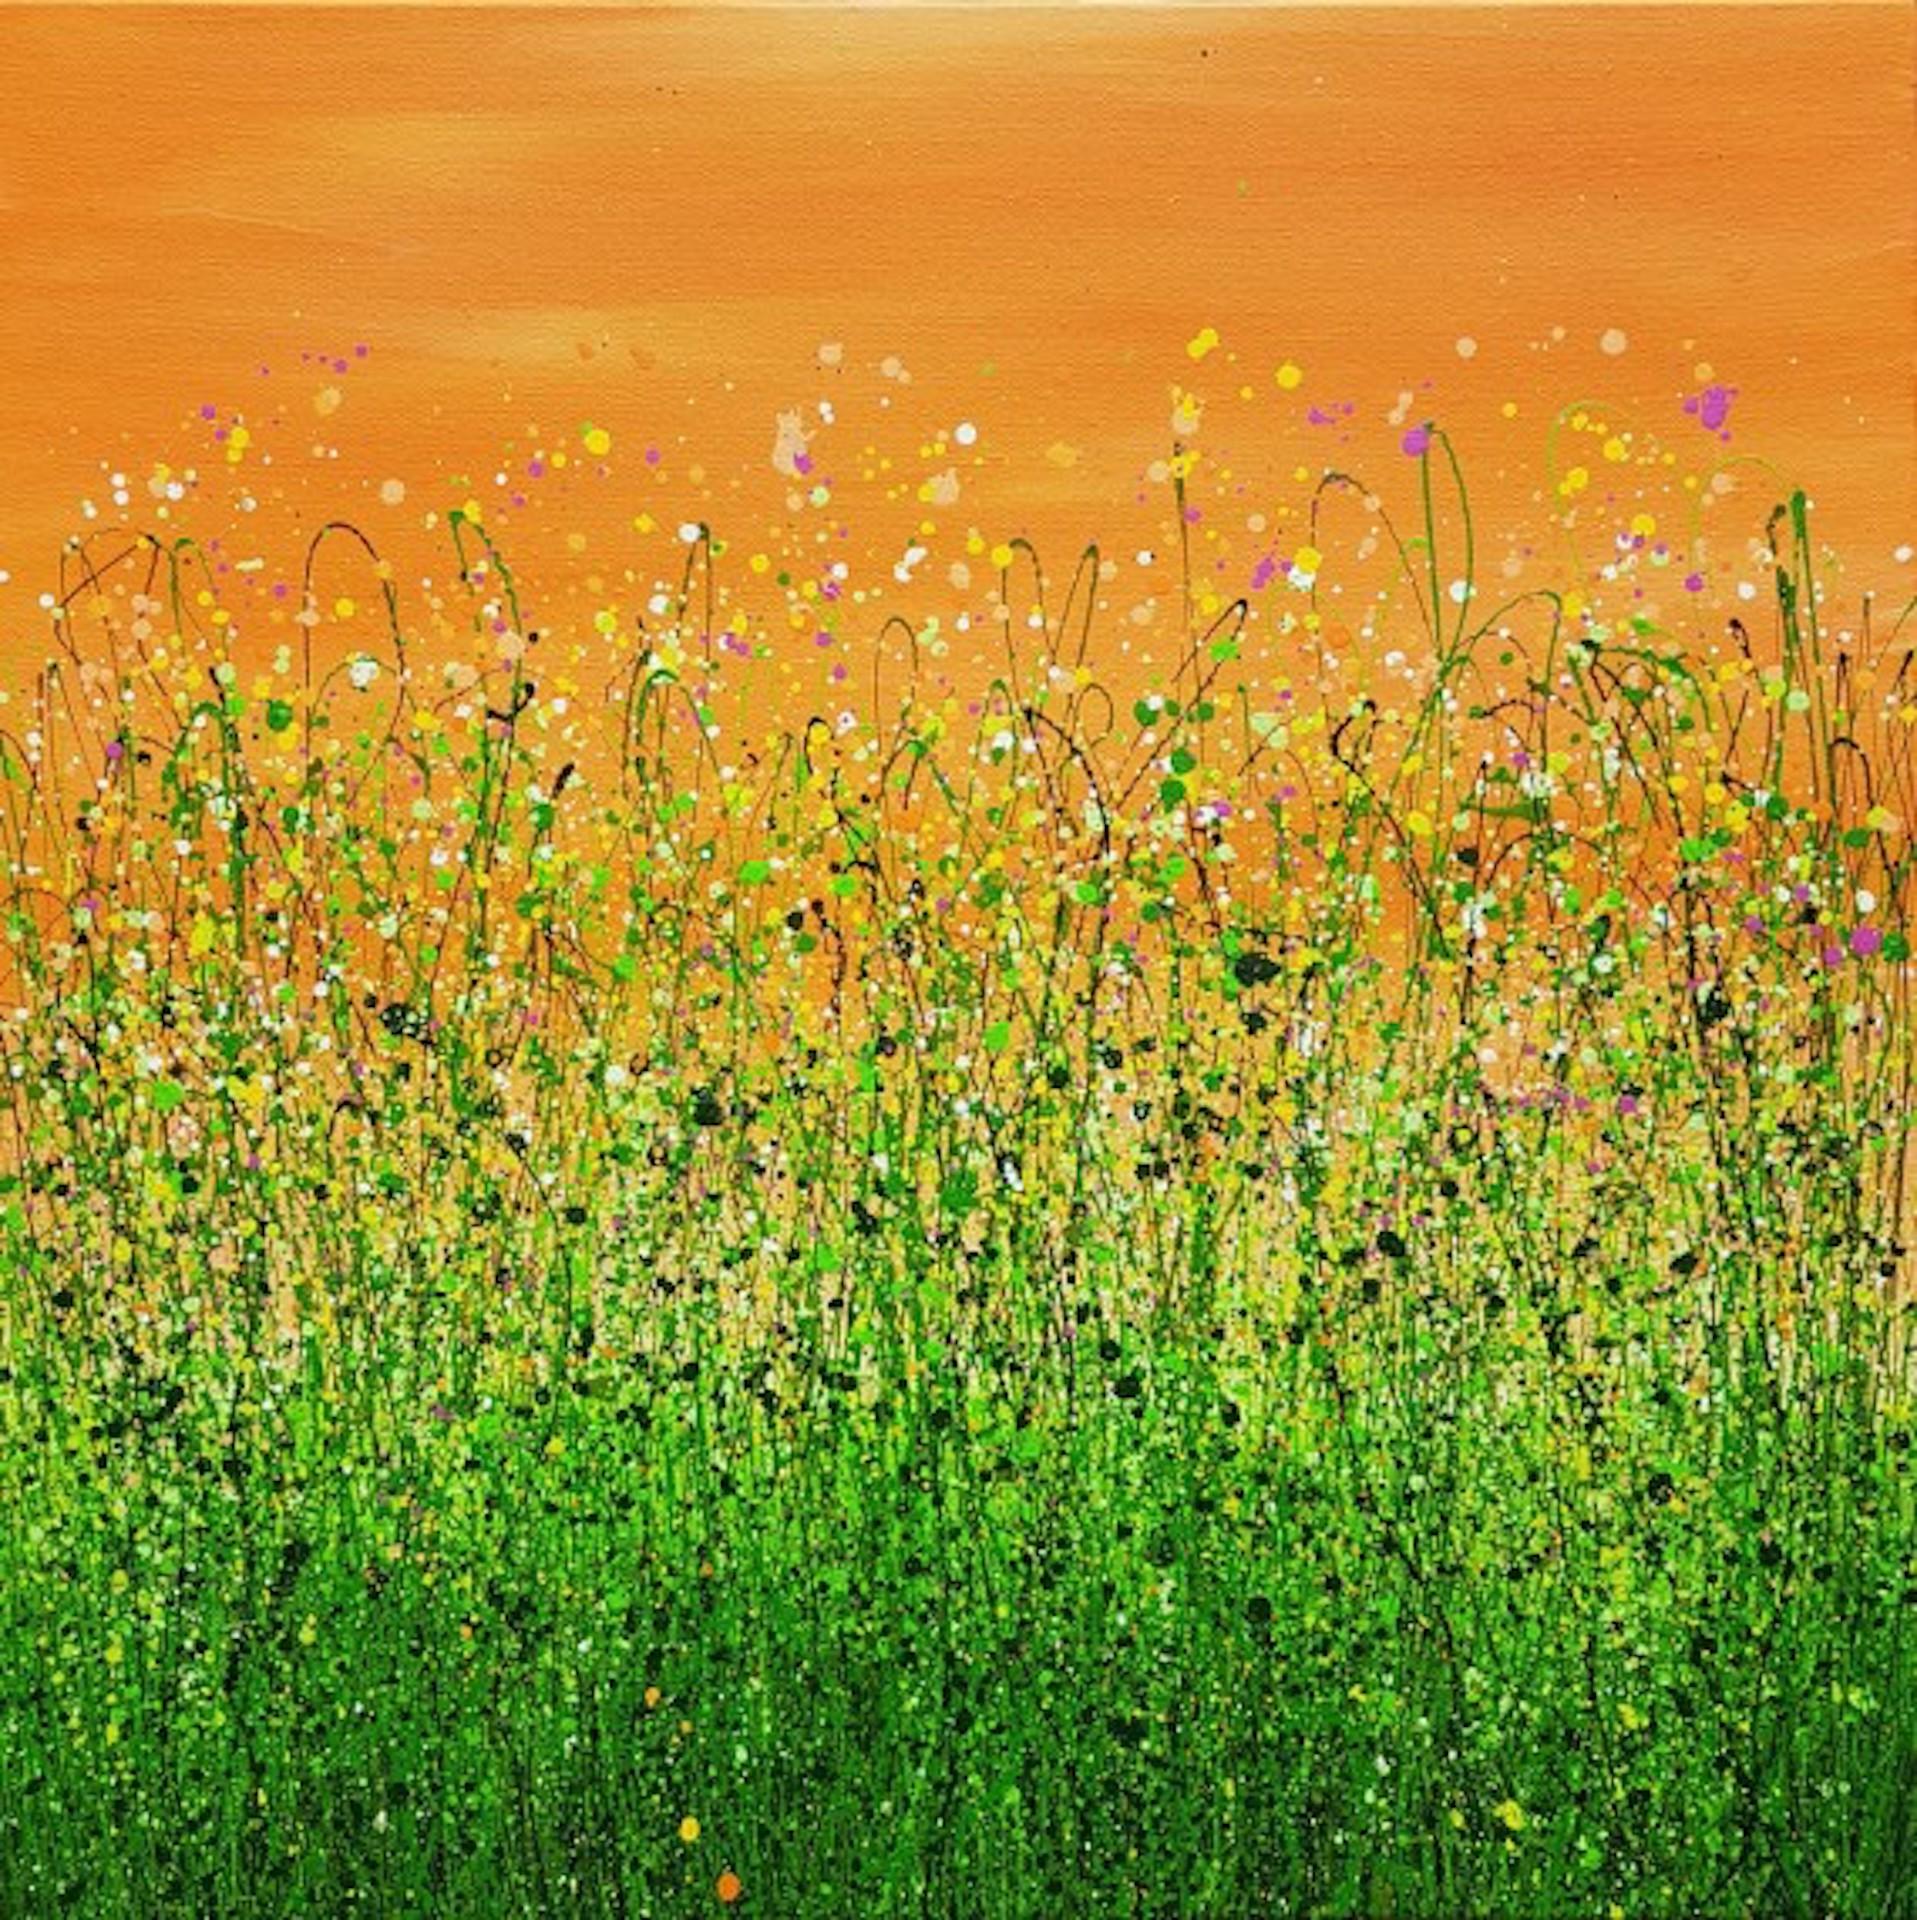 Tangerine Dream 5, Lucy Moore, Original Floral Landscape Painting, Affordable